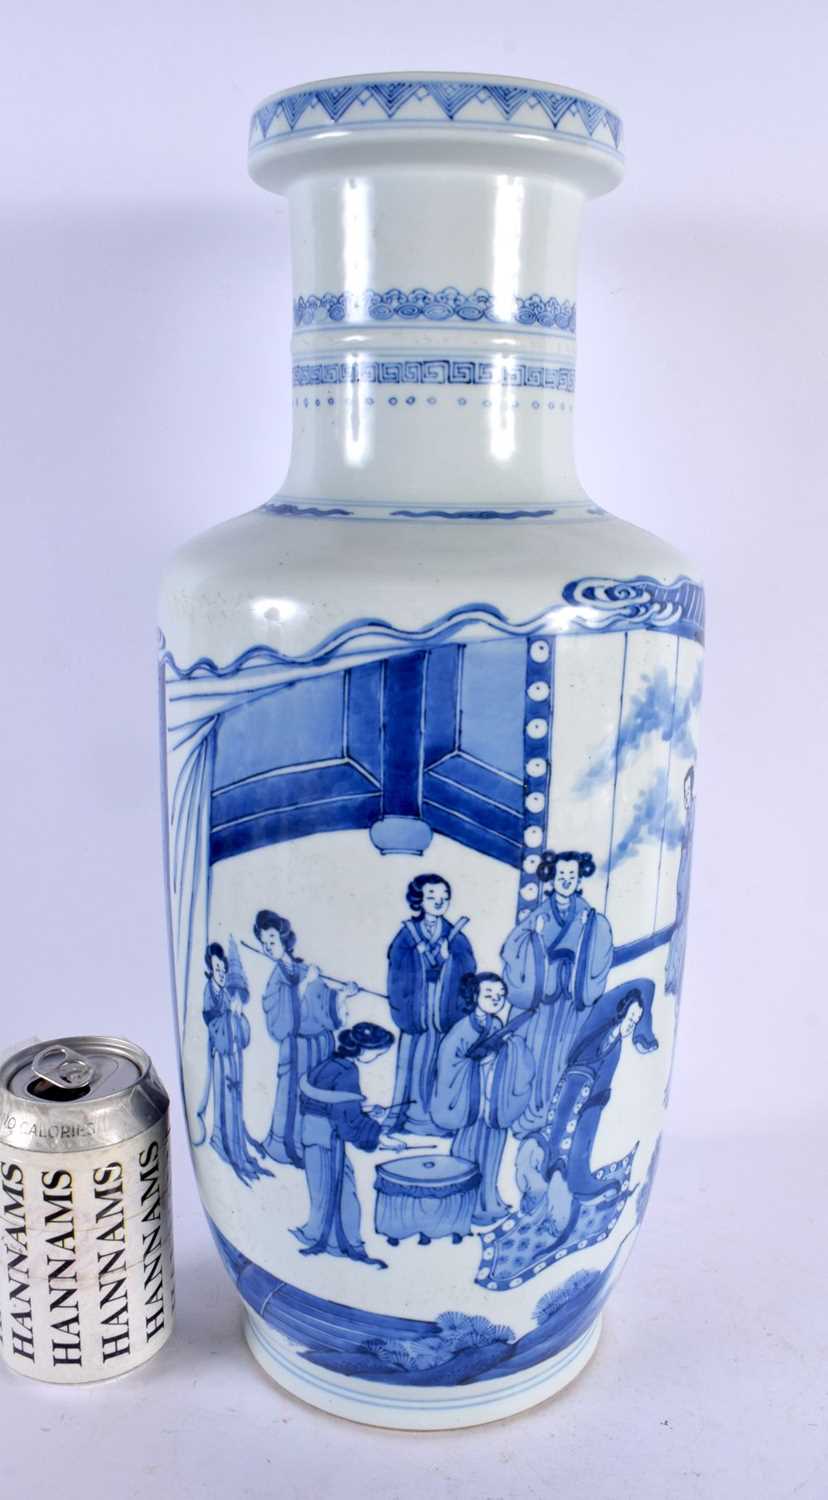 A LARGE CHINESE BLUE AND WHITE PORCELAIN ROULEAU VASE probably 19th century, painted with figures in